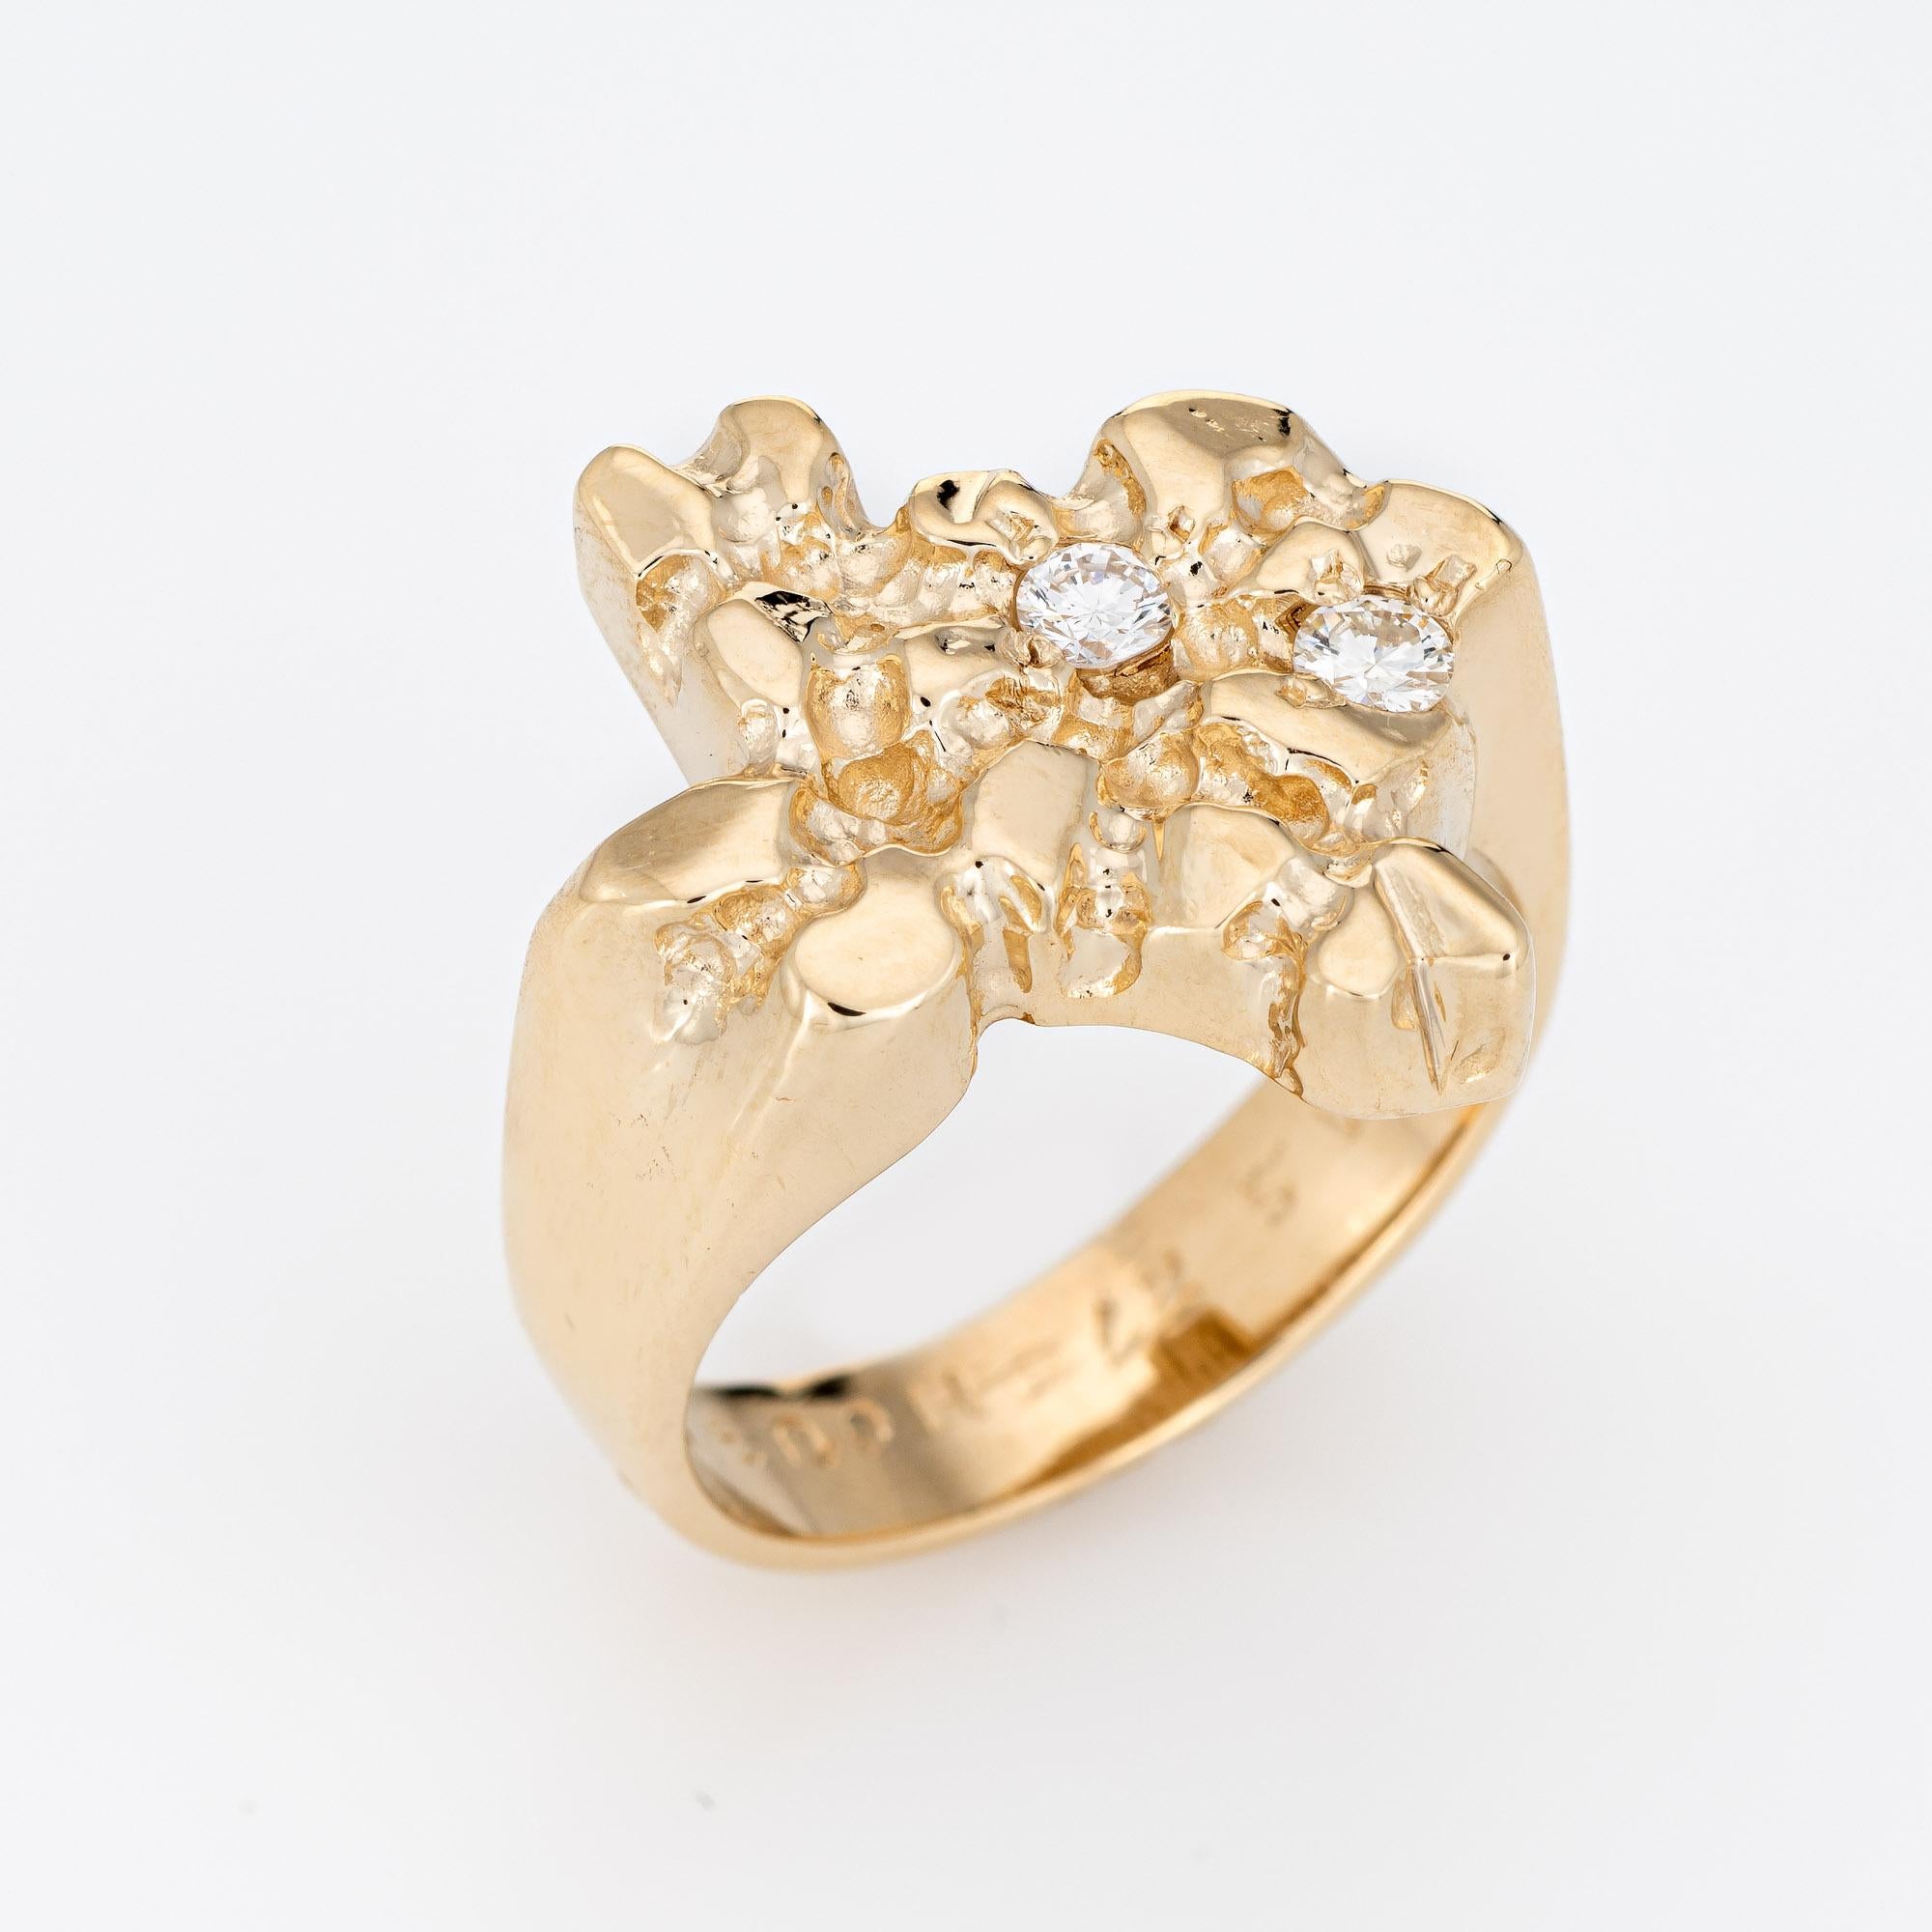 Stylish vintage State of Texas diamond nugget ring (circa 1987) crafted in 14 karat yellow gold. 

One estimated 0.10 and one estimated 0.18 carat diamond are set into the mount. The total diamond weight is estimated at 0.28 carats (estimated at G-H